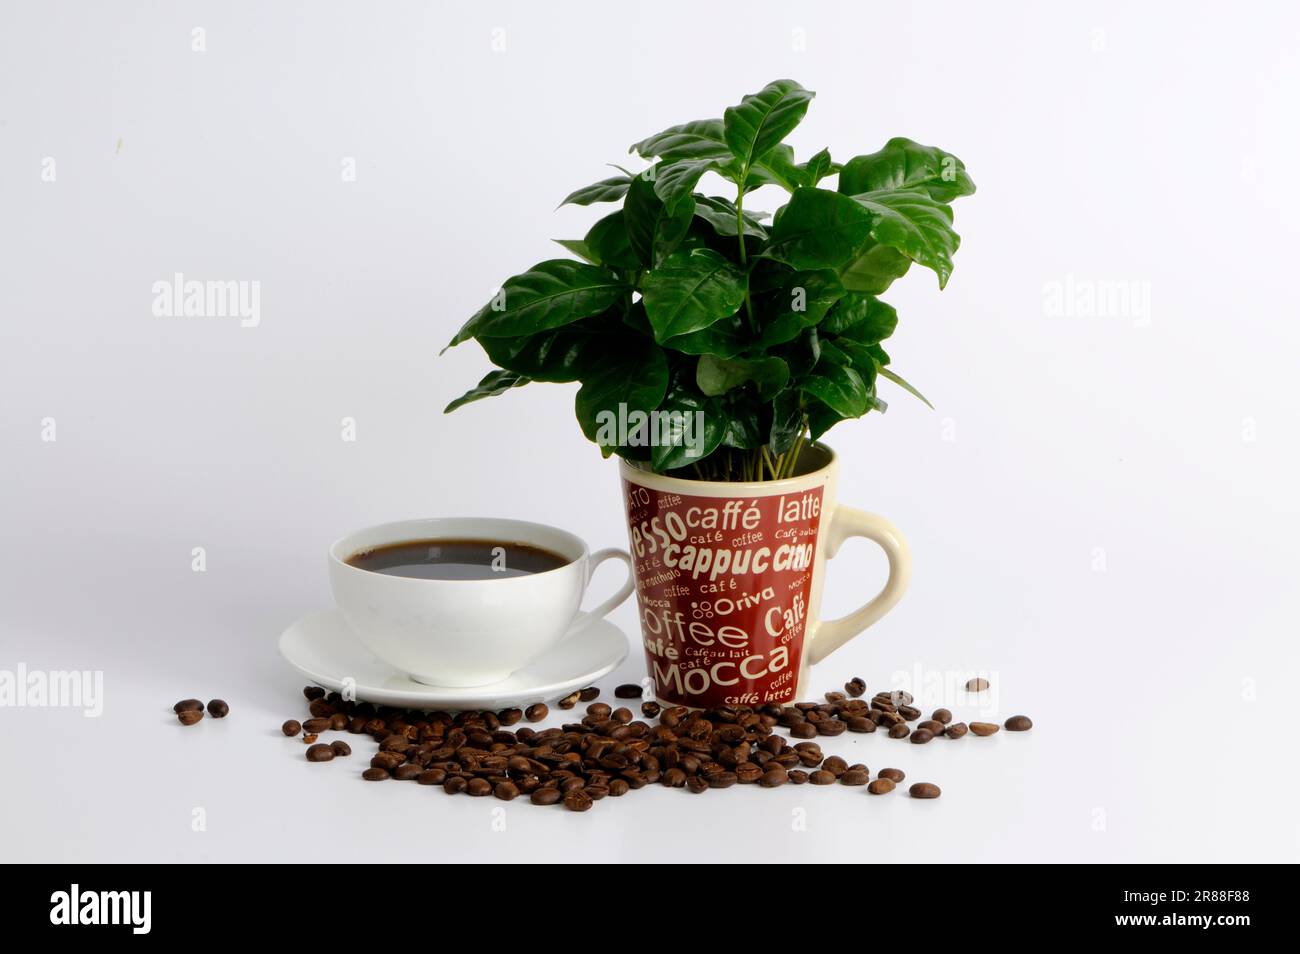 Coffee bush, cup of coffee and coffee beans (Coffea arabica), coffee bean, coffee beans Stock Photo